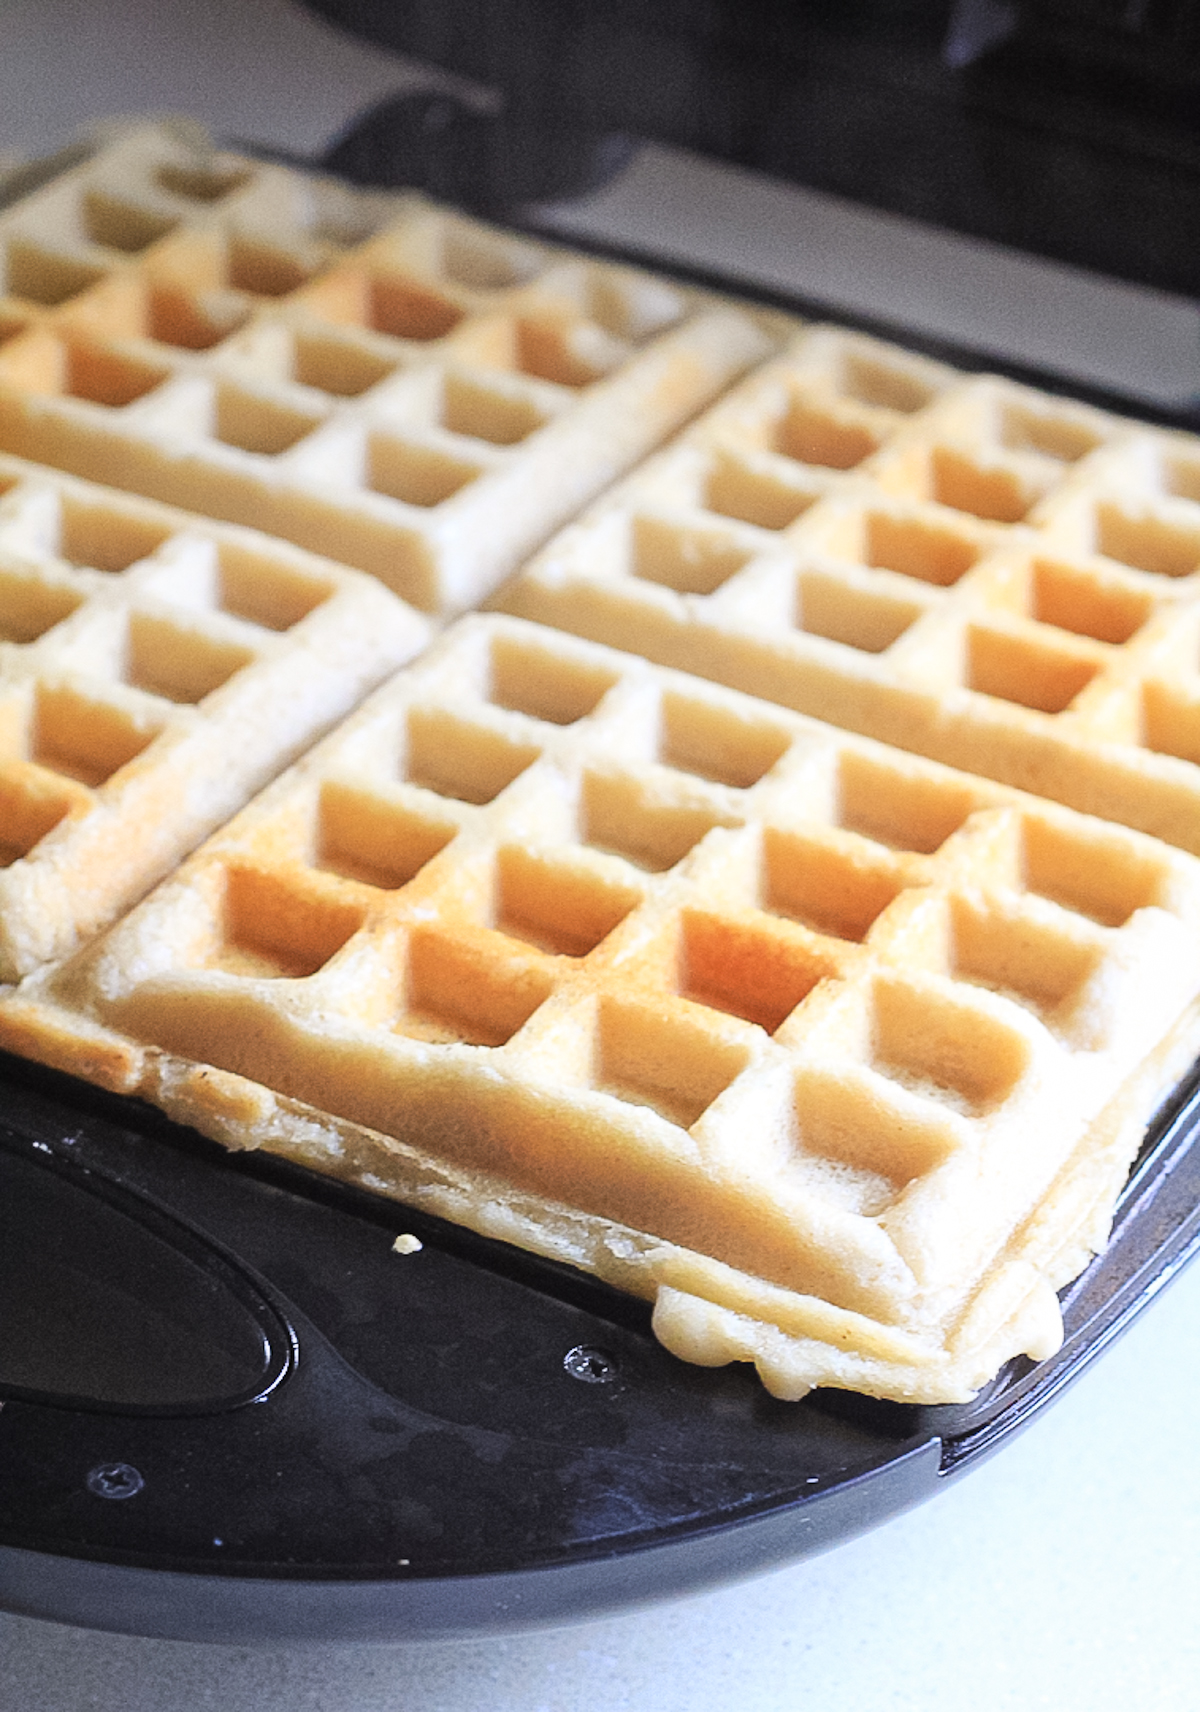 Waffles cooking in a waffle iron.